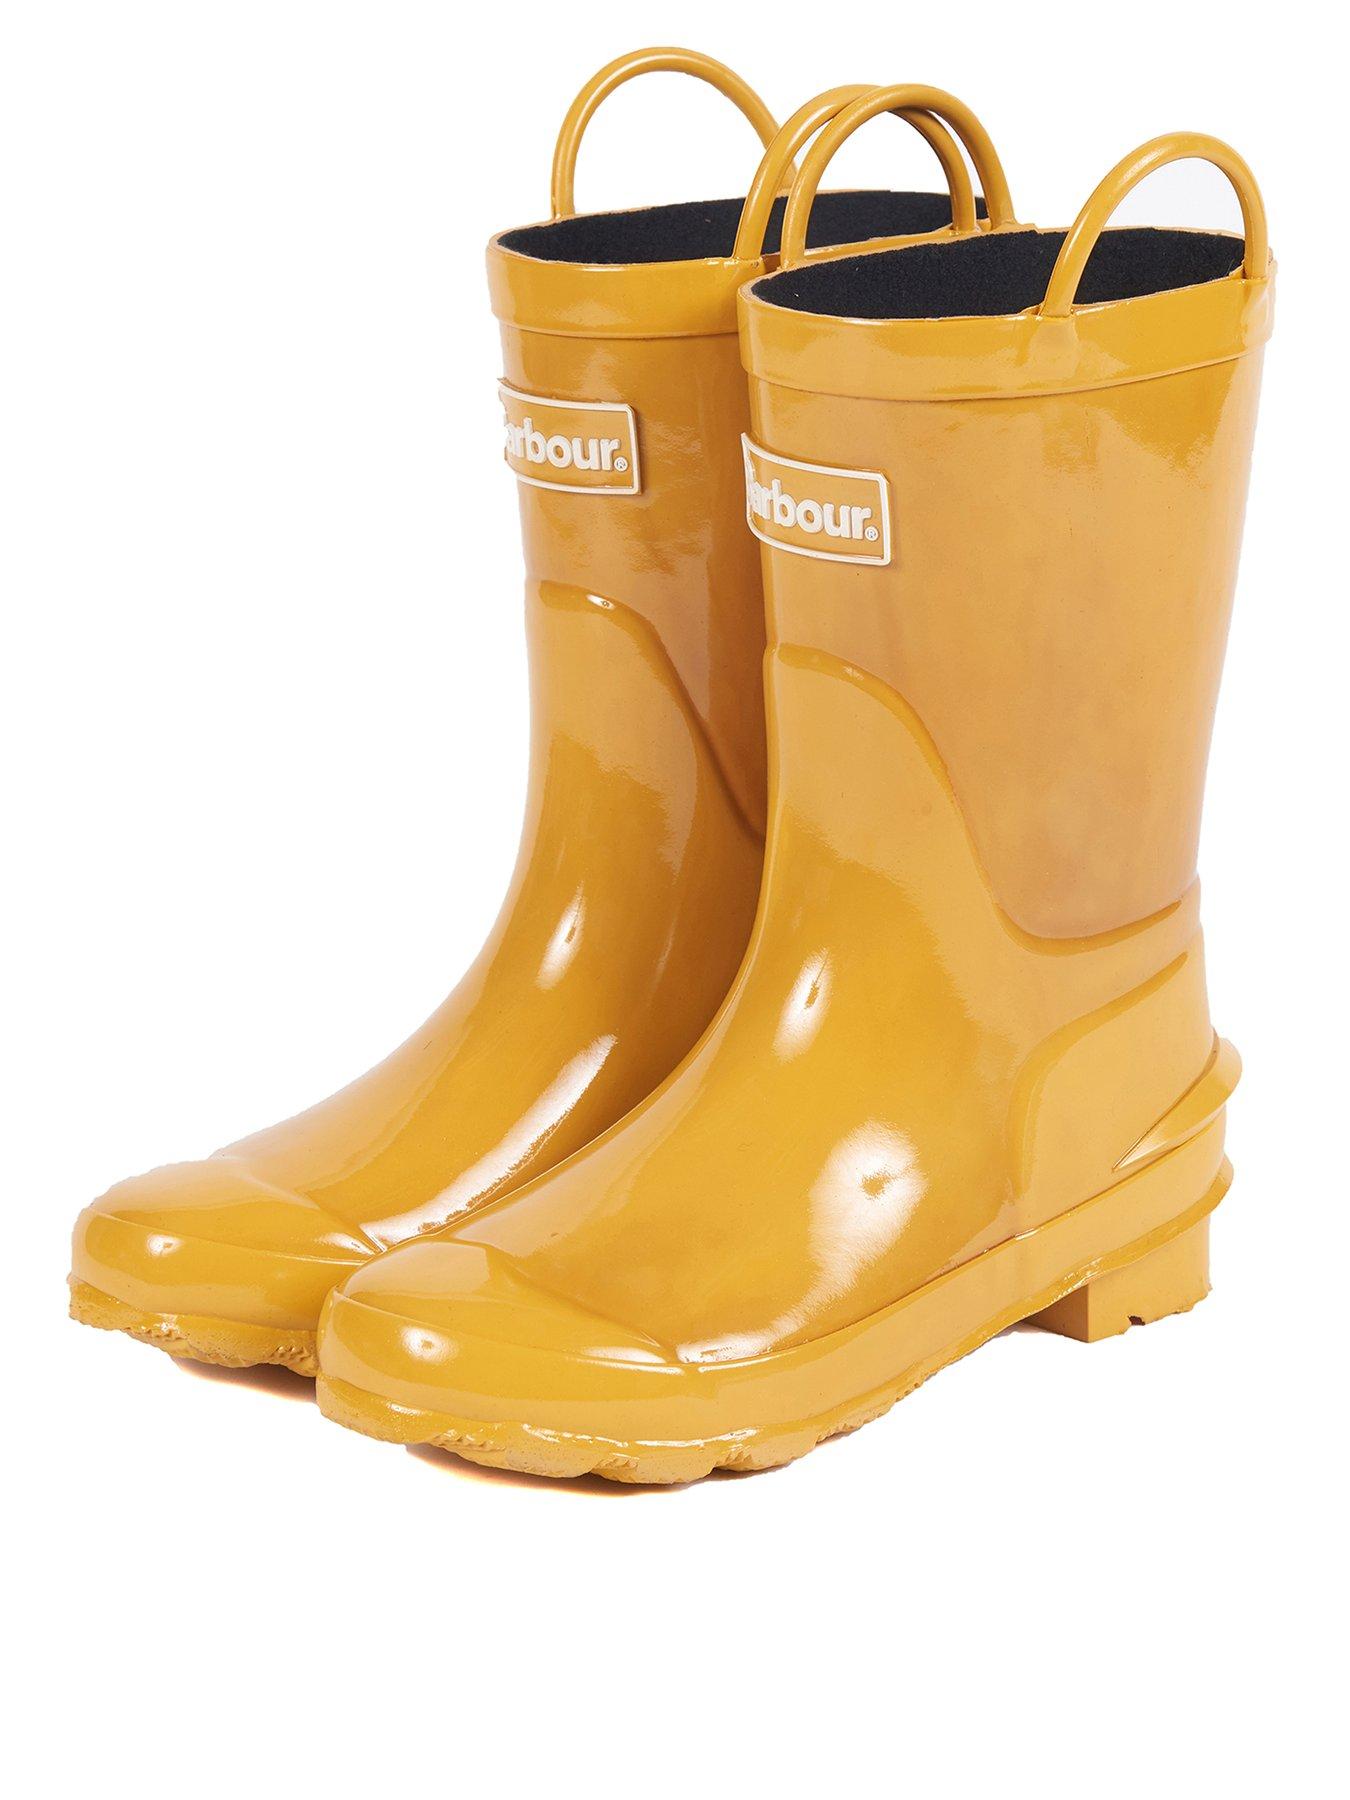 barbour yellow wellies